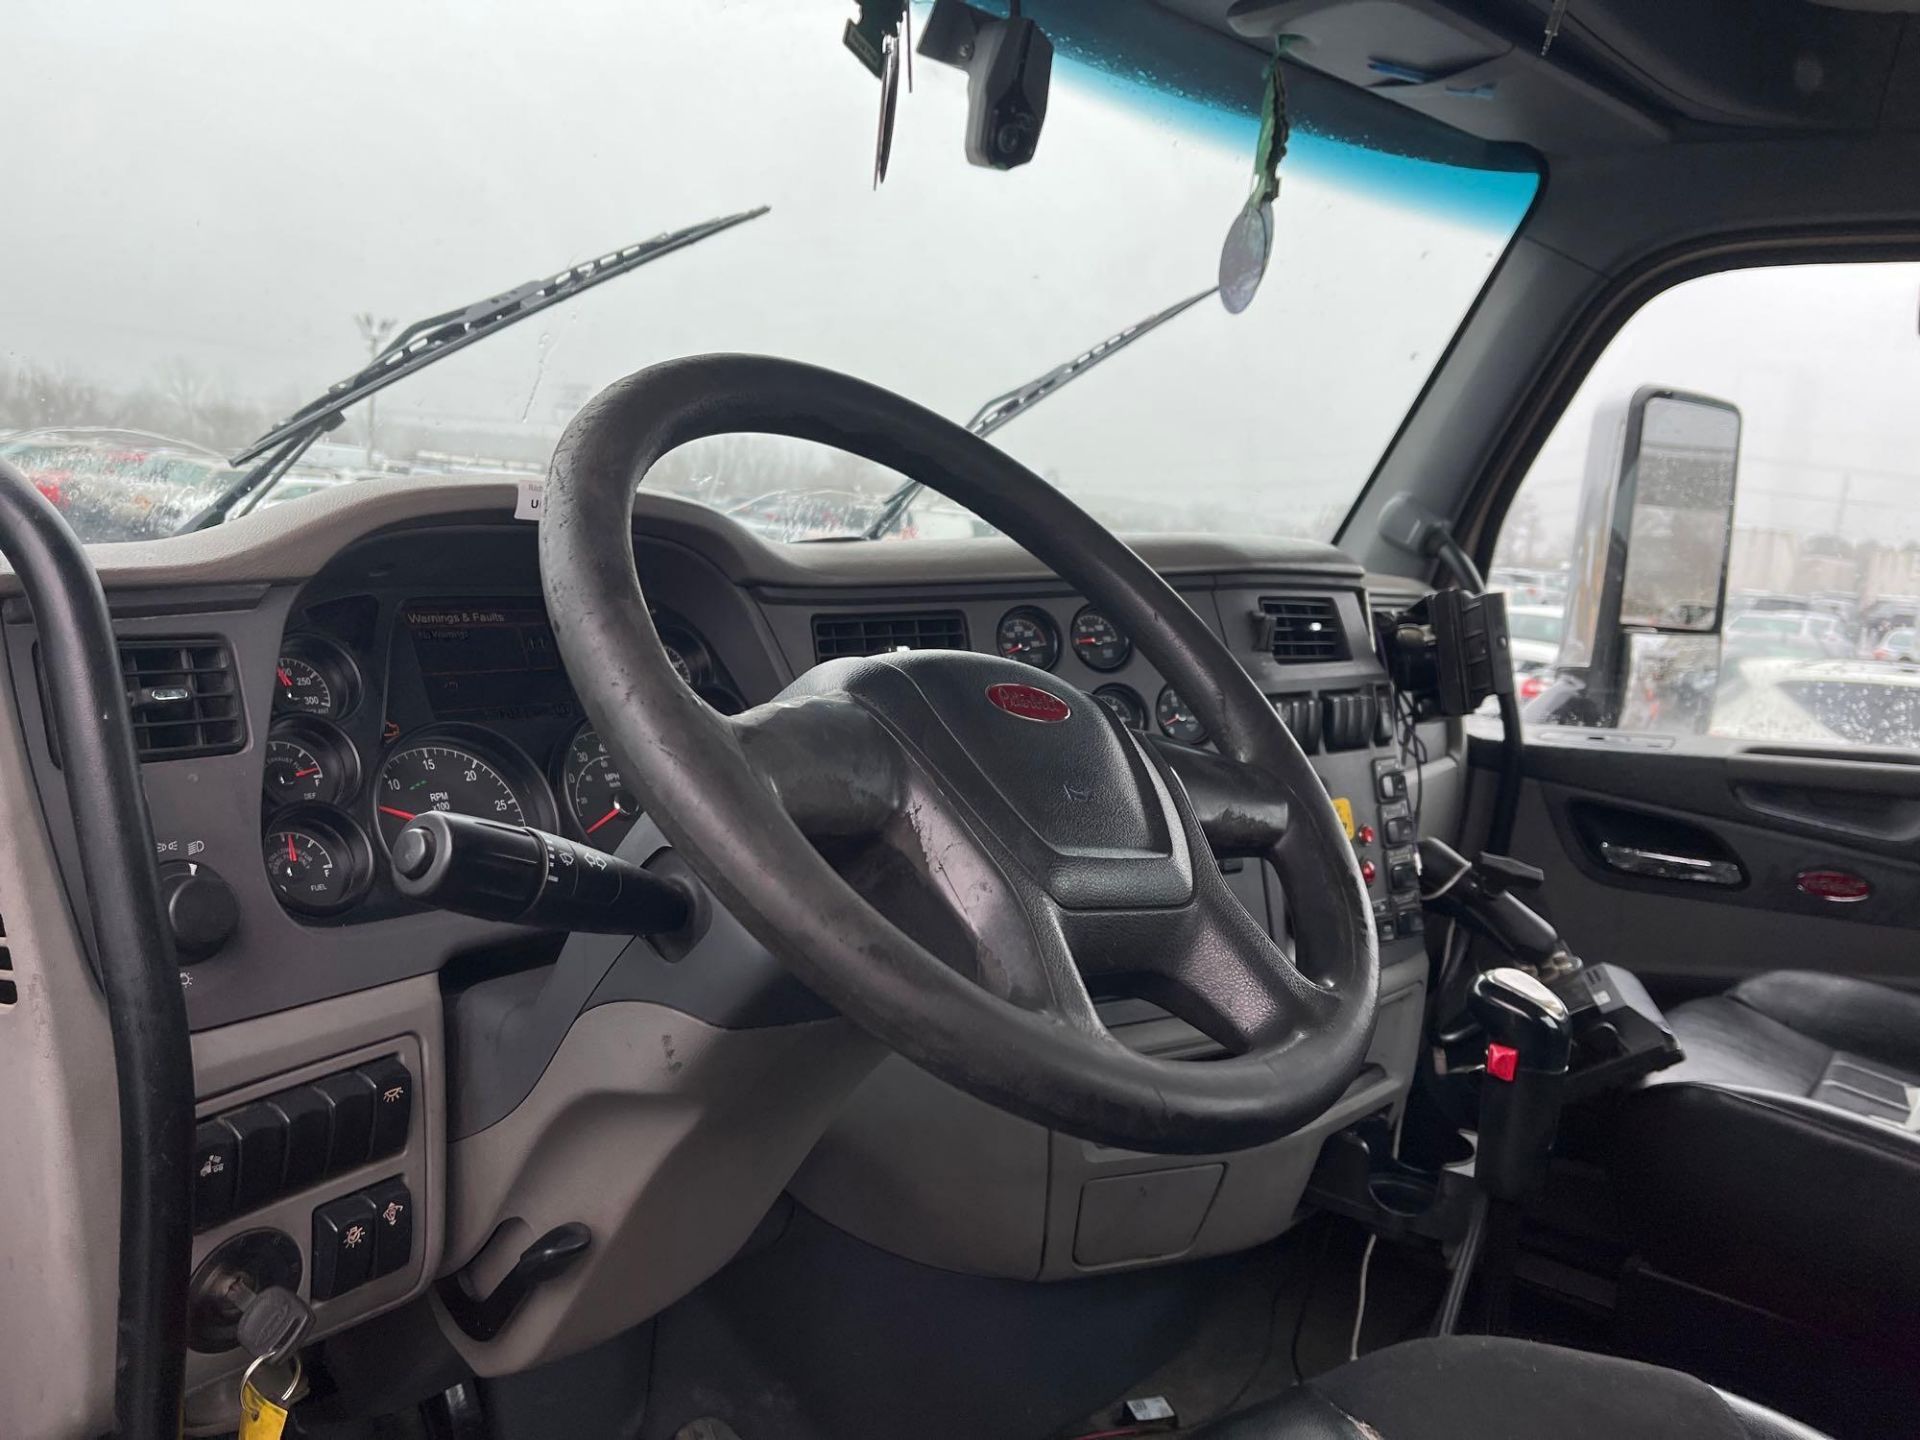 2016 Peterbilt Class 8 Day Cab Road Tractor - Image 7 of 22